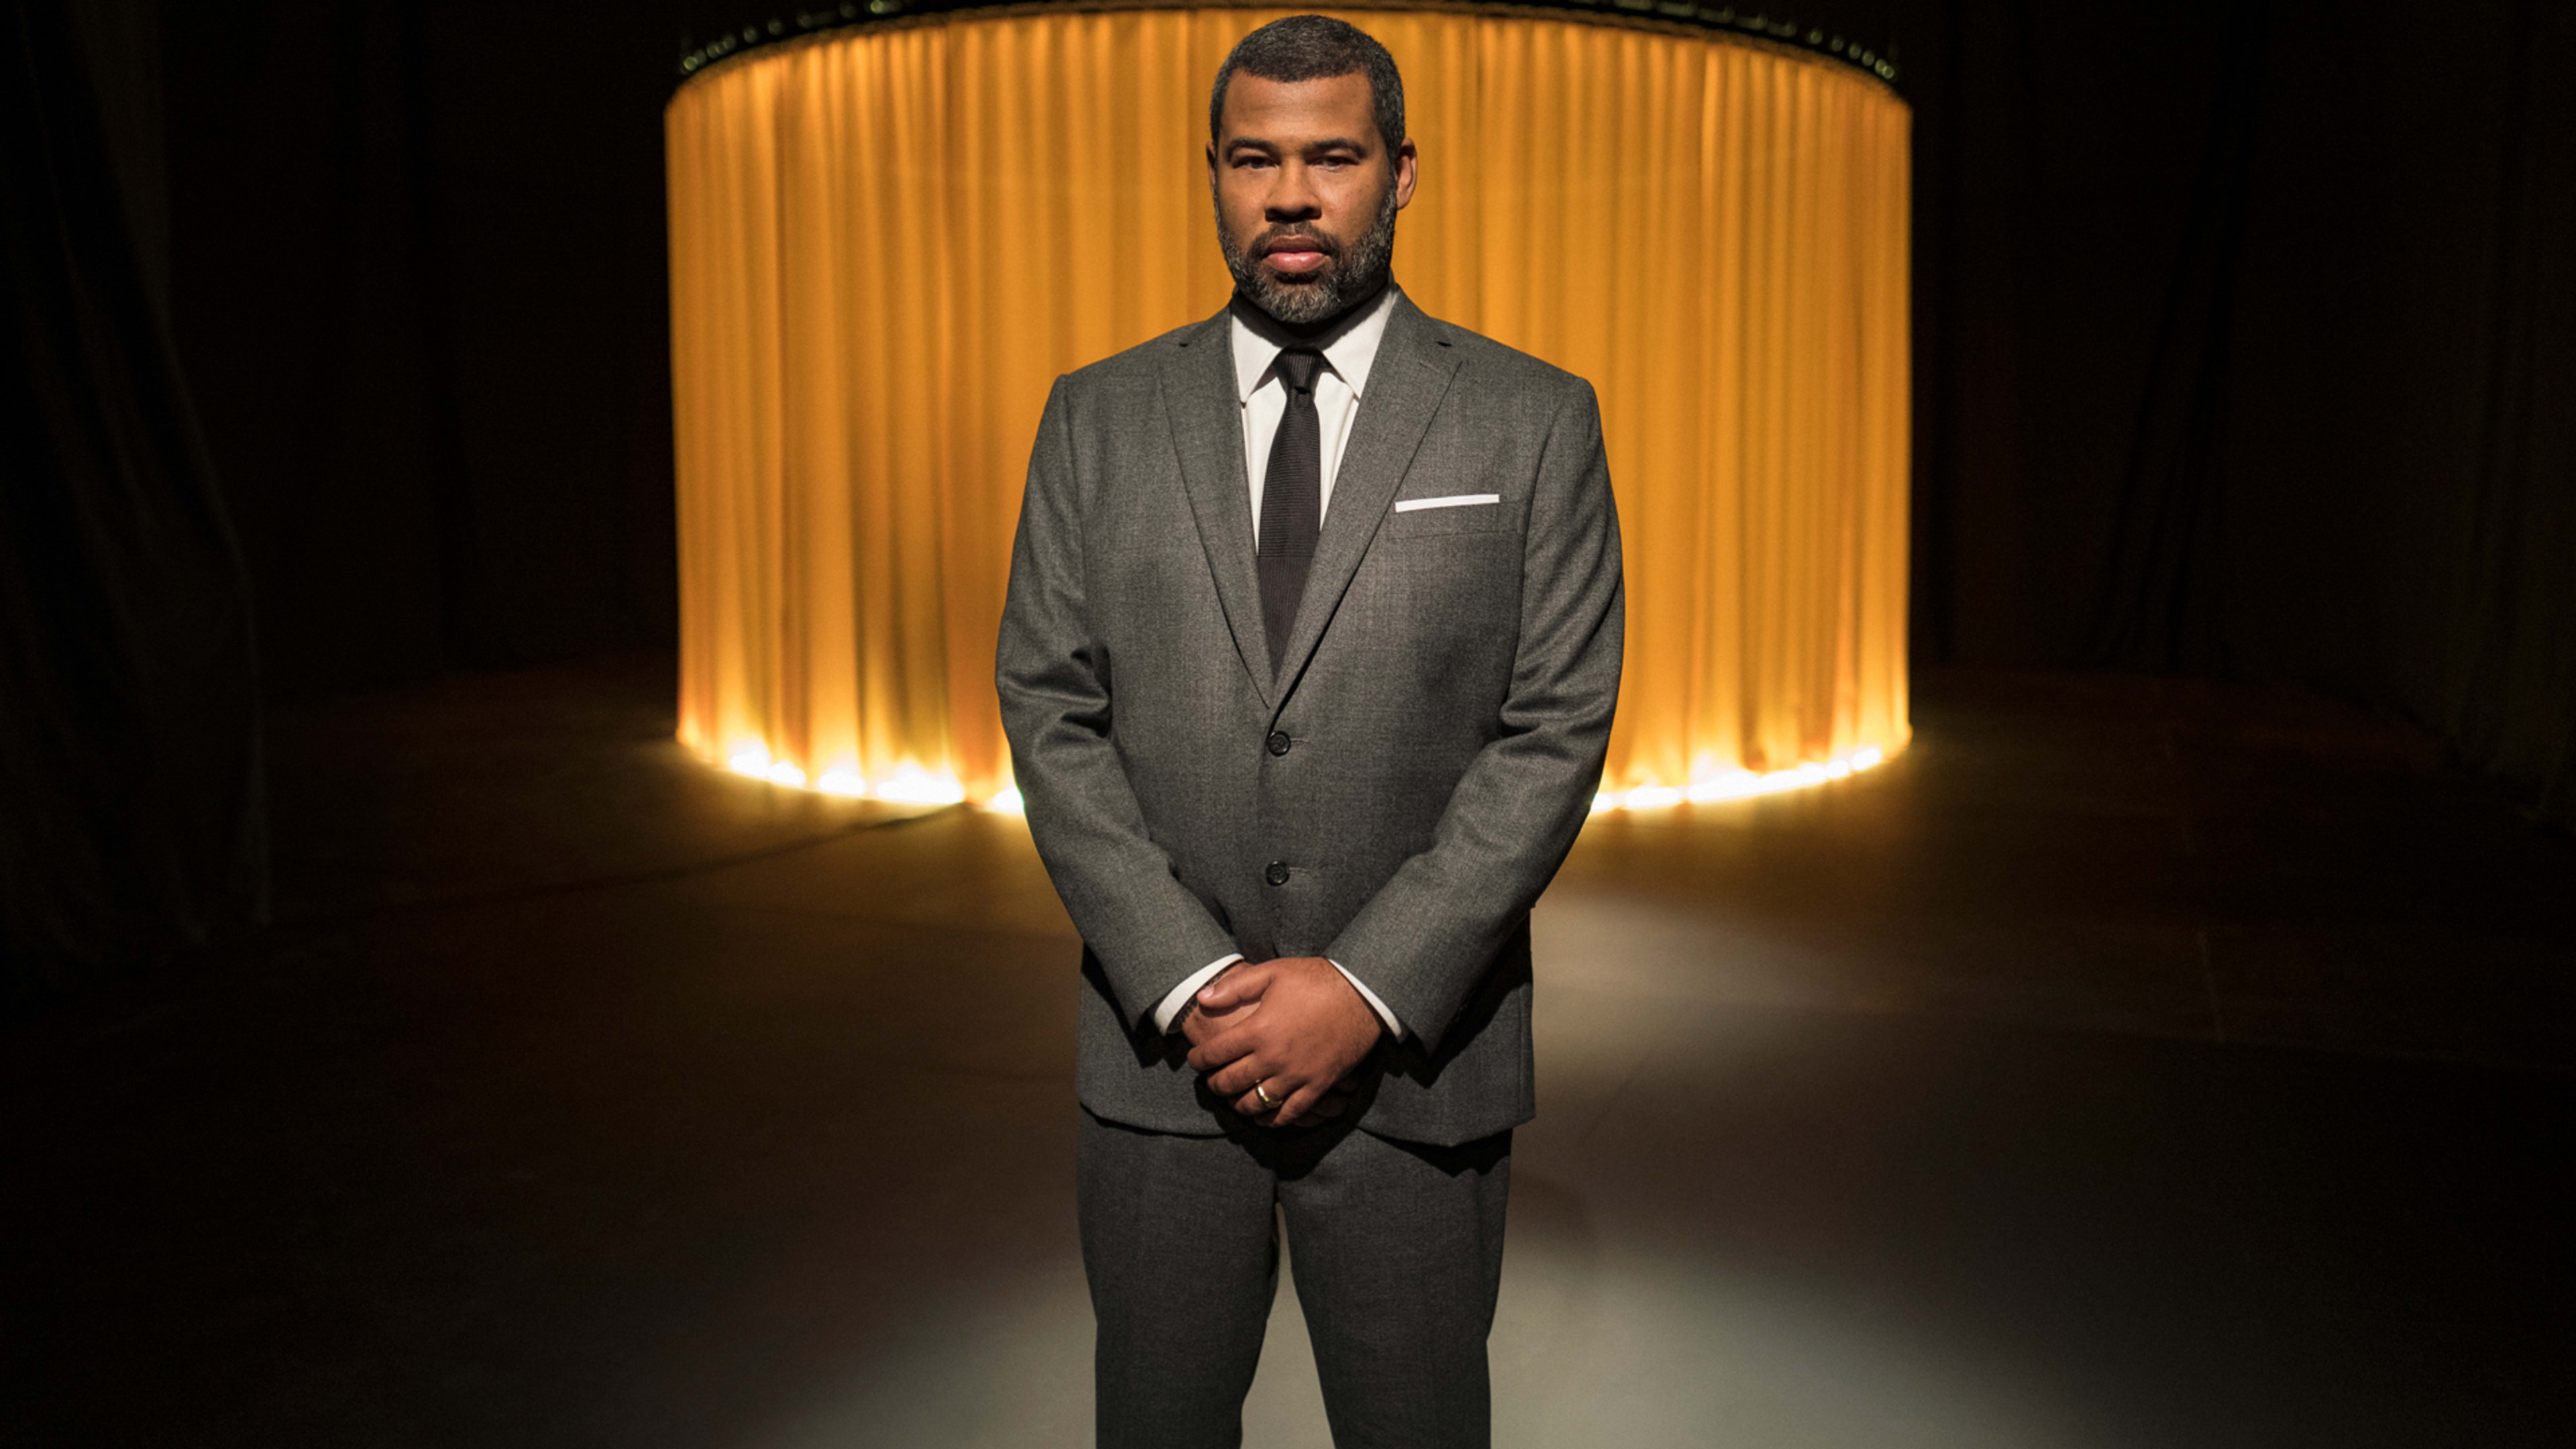 You can watch the first episode of Jordan Peele’s “Twilight Zone” for free on YouTube